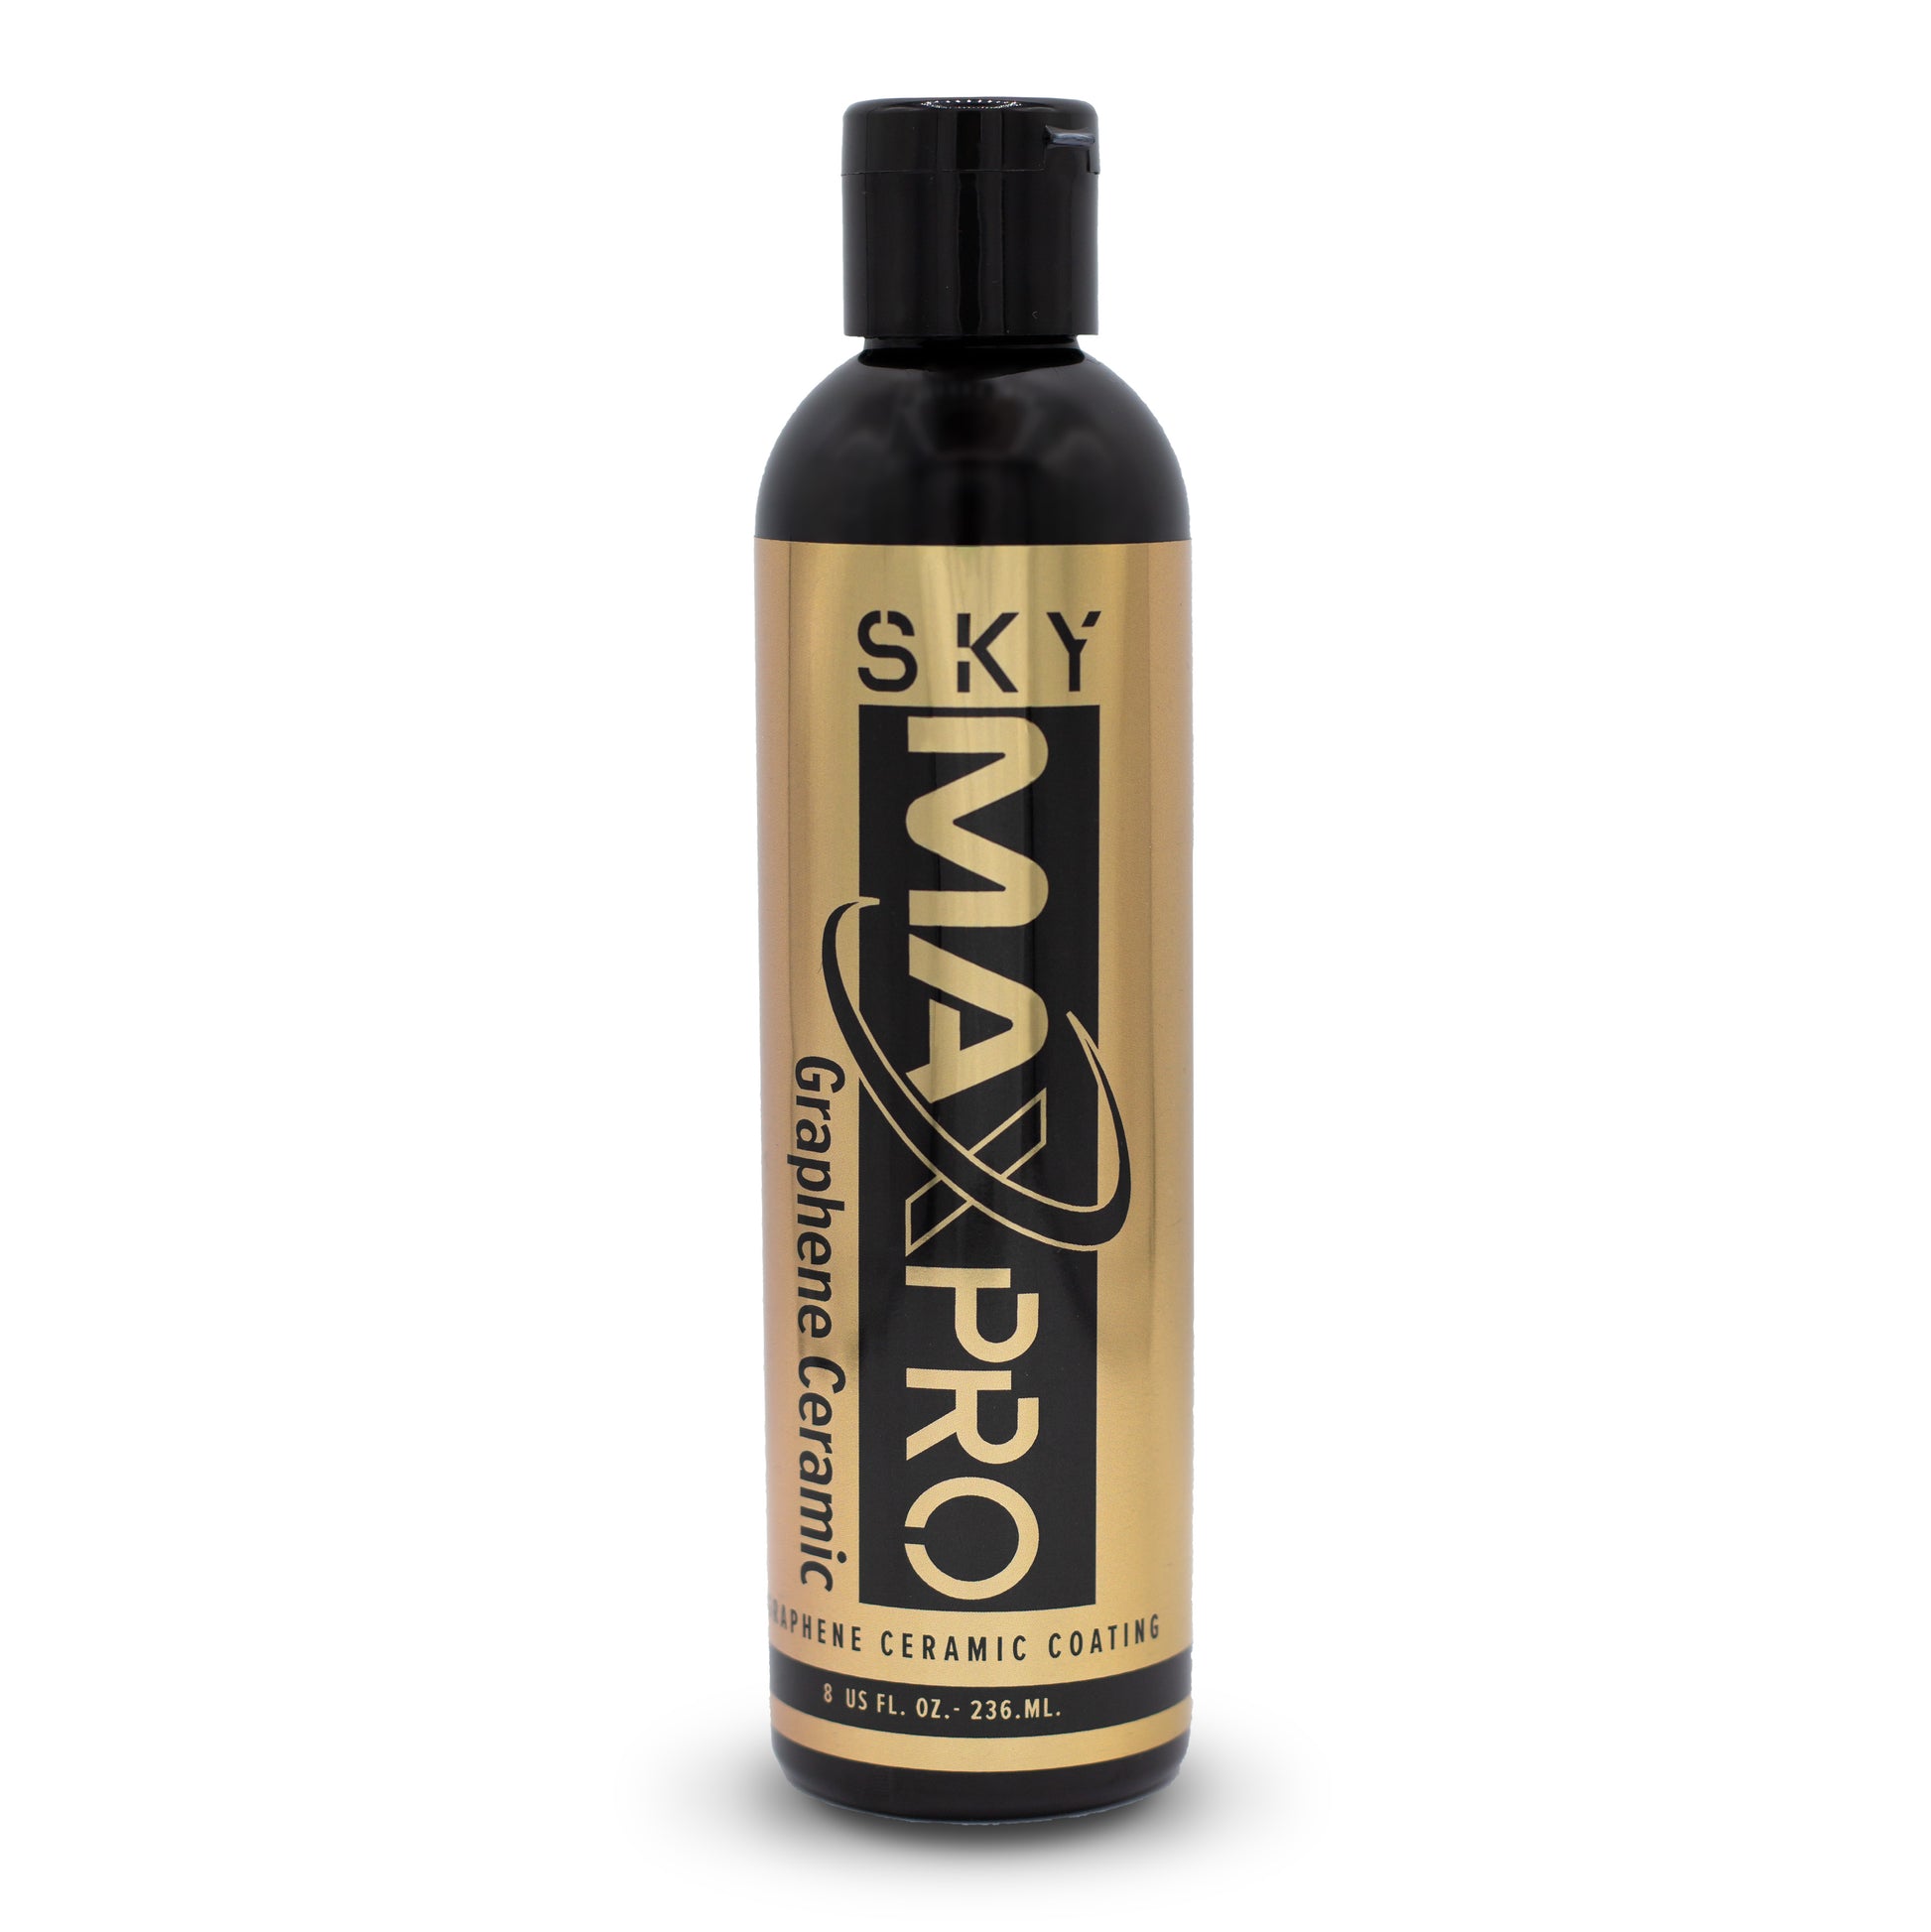 PRO CERAMIC GRAPHENE SPRAY COATING WITH SILICON DIOXIDE – SKY MAXPRO